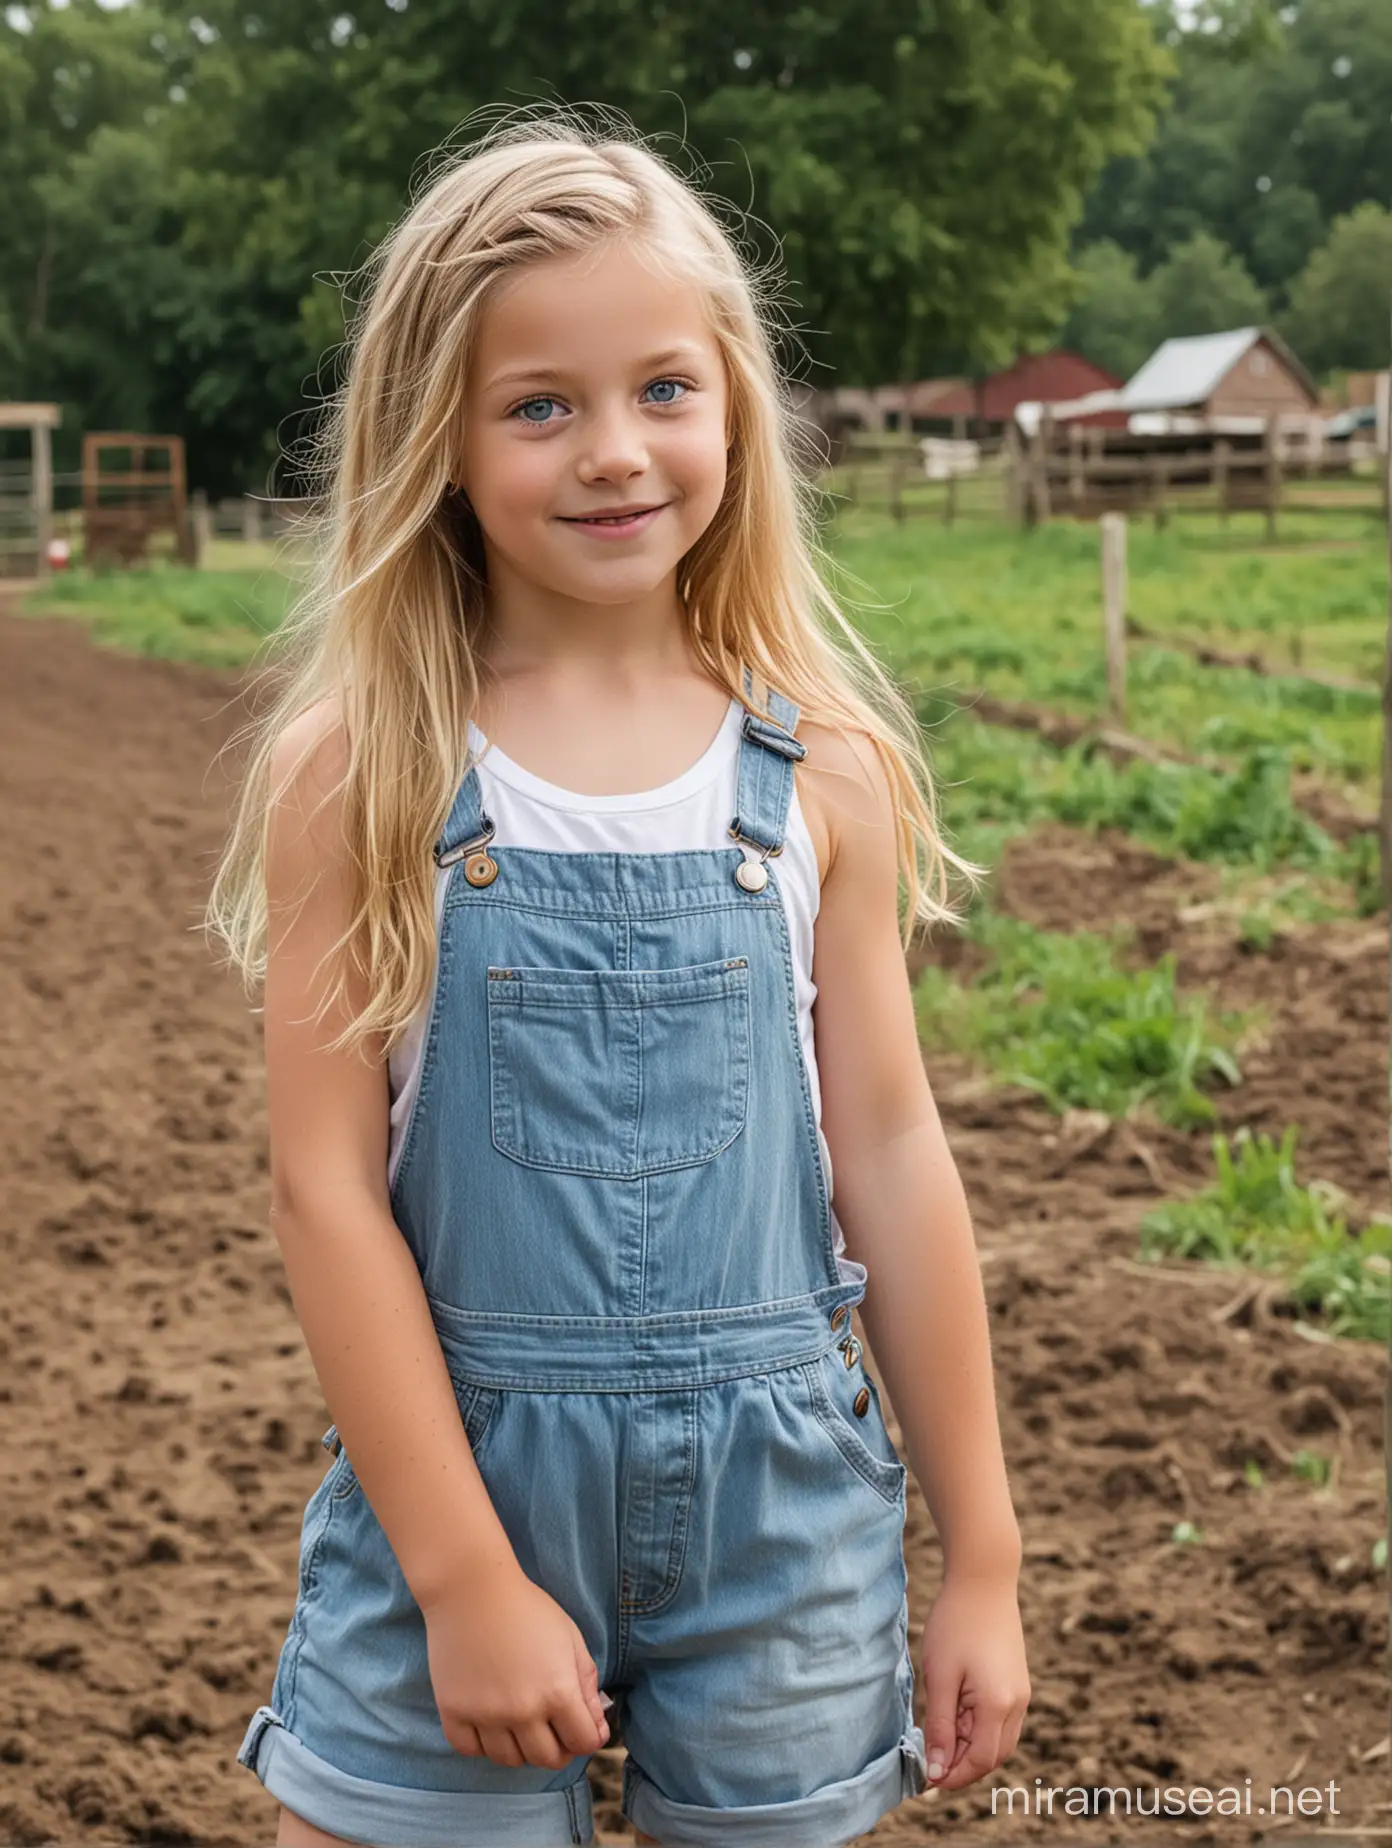 12 years old sweet cute adorable innocent blue eyes extremely cute long straight wavy blonde hair wearing overall shorts playing on the farm